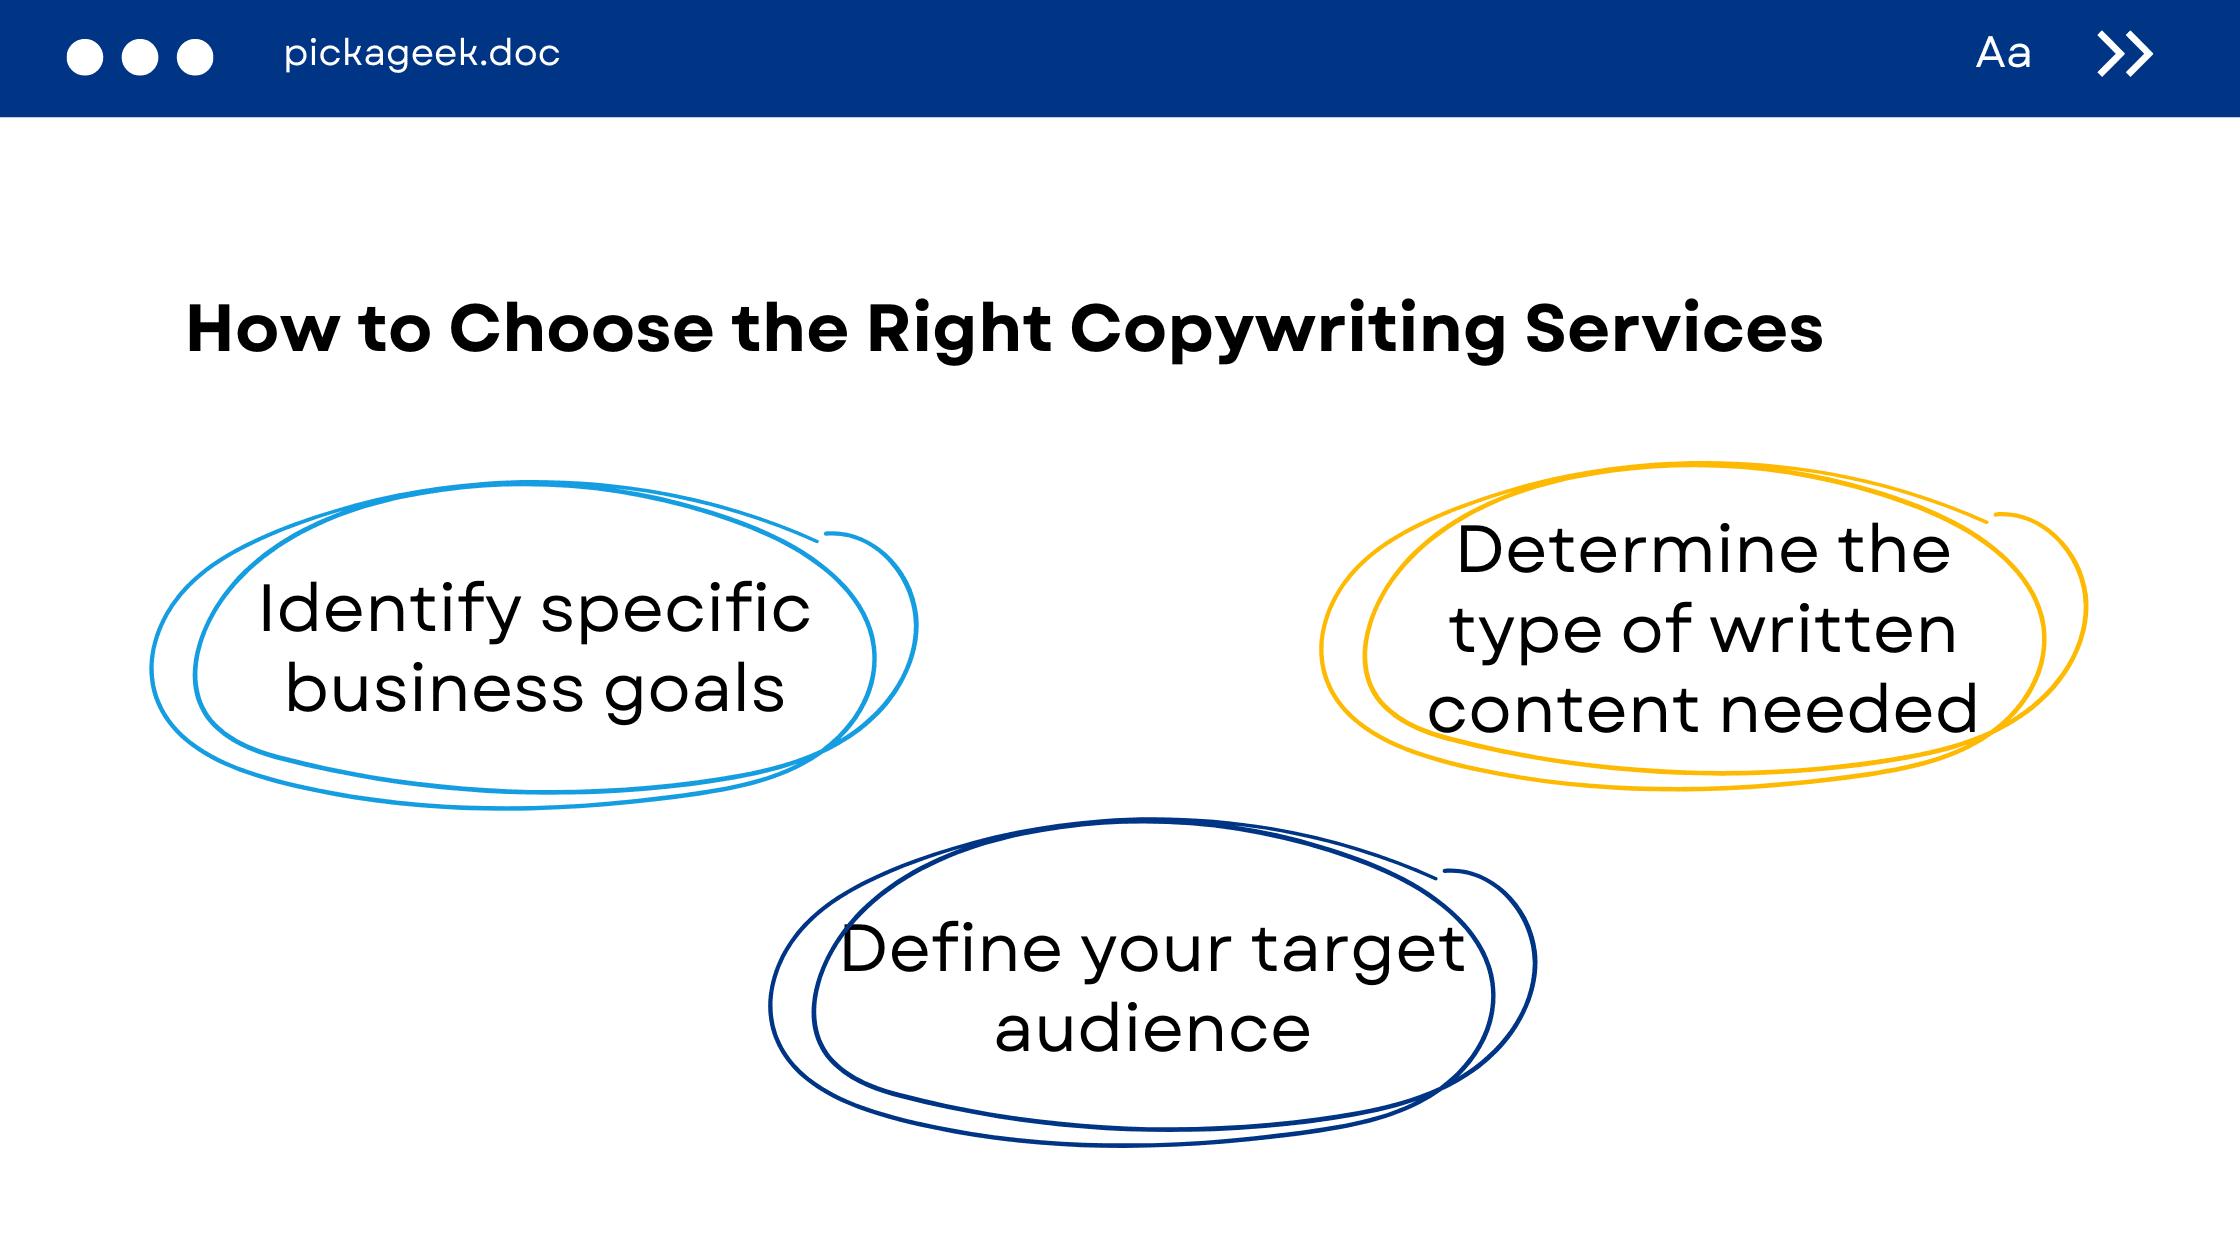 Choosing the Right Copywriting Services